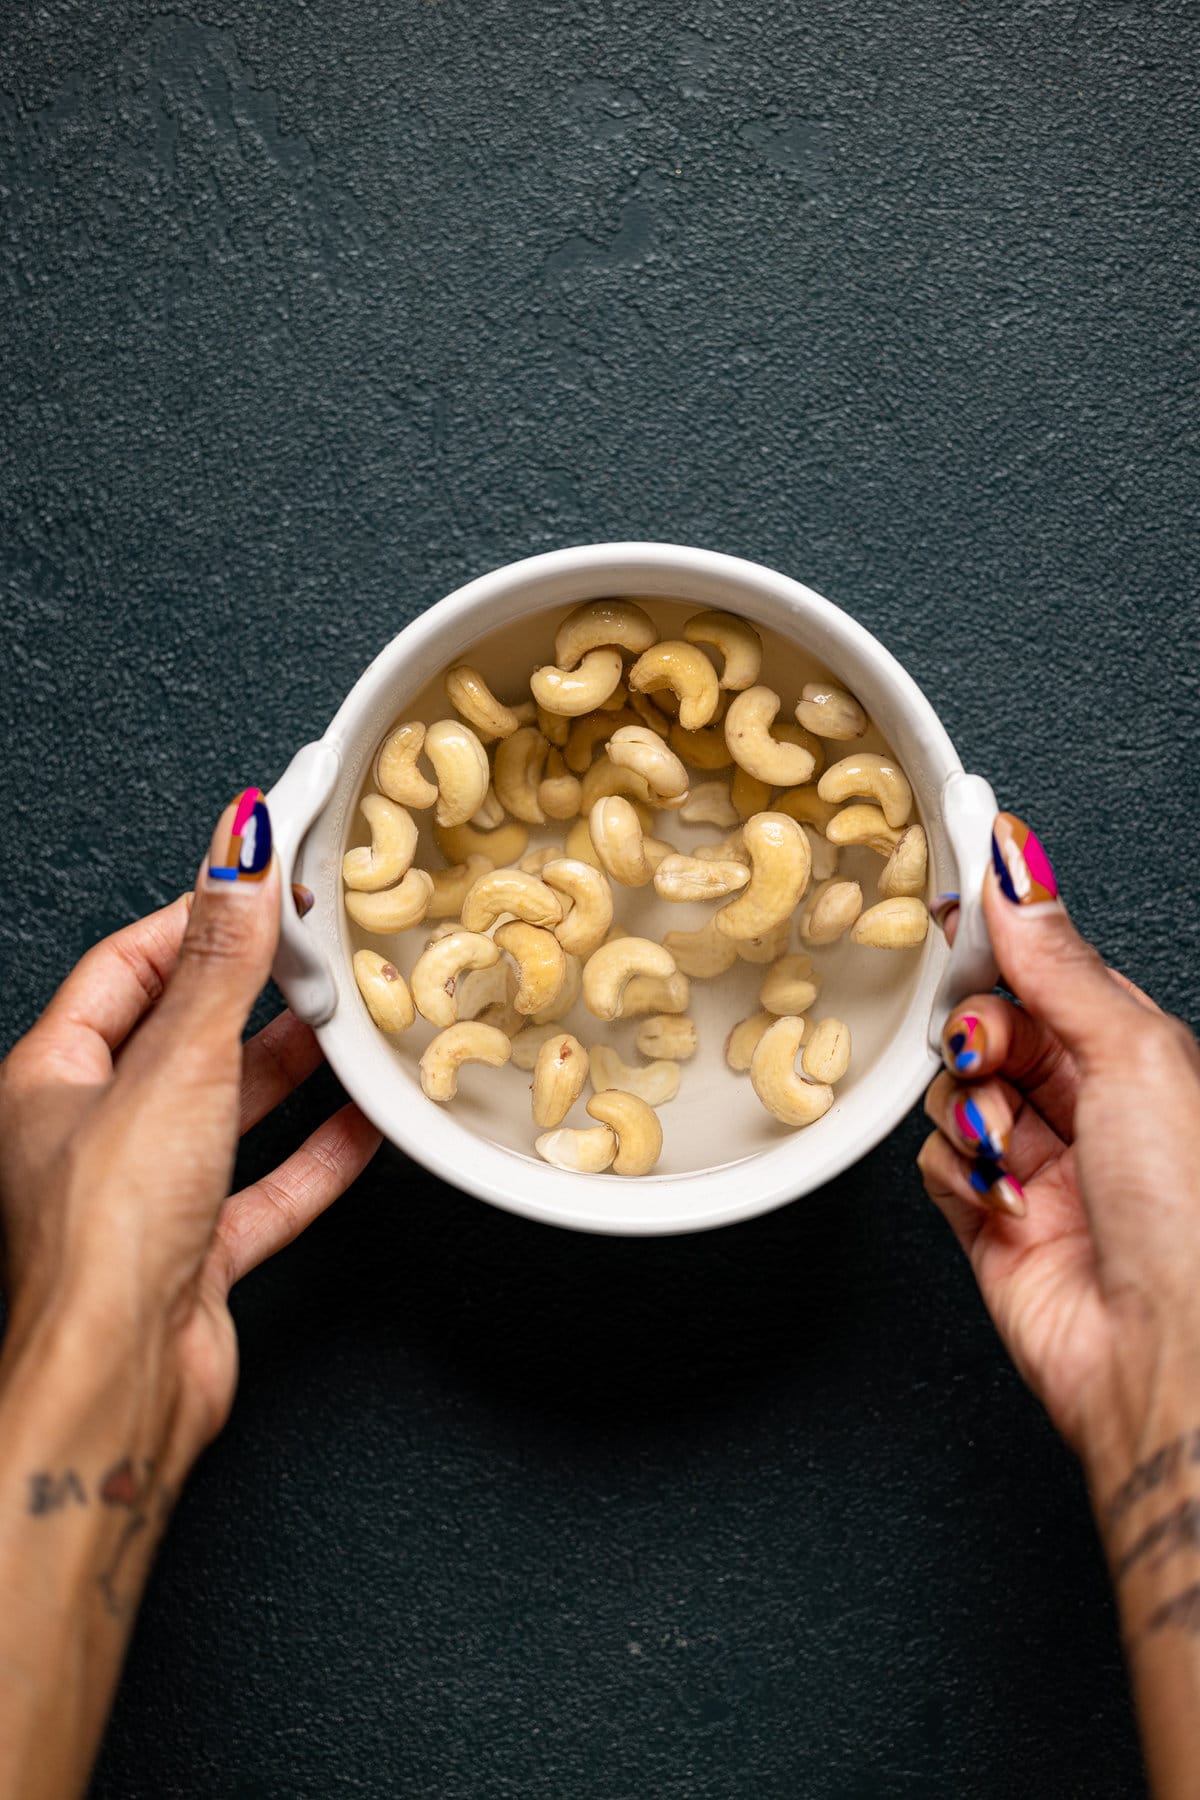 Hands holding a bowl with peanuts soaking in water